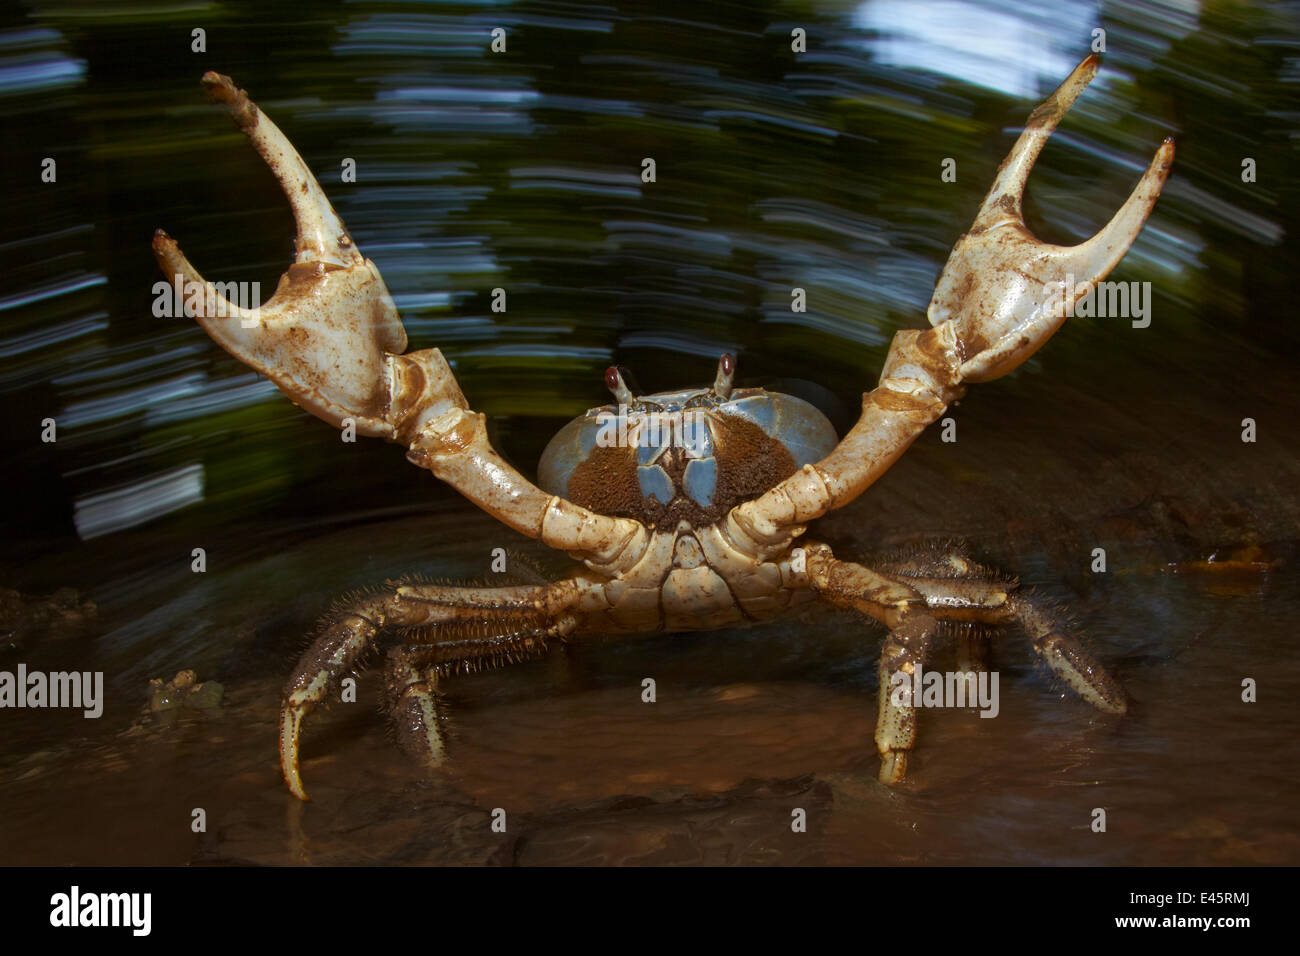 Blue Crab (Discoplax hirtipes) with claws raised in defensive / aggressive posture, endemic to Christmas Island, Indian Ocean, Australian Territory Stock Photo